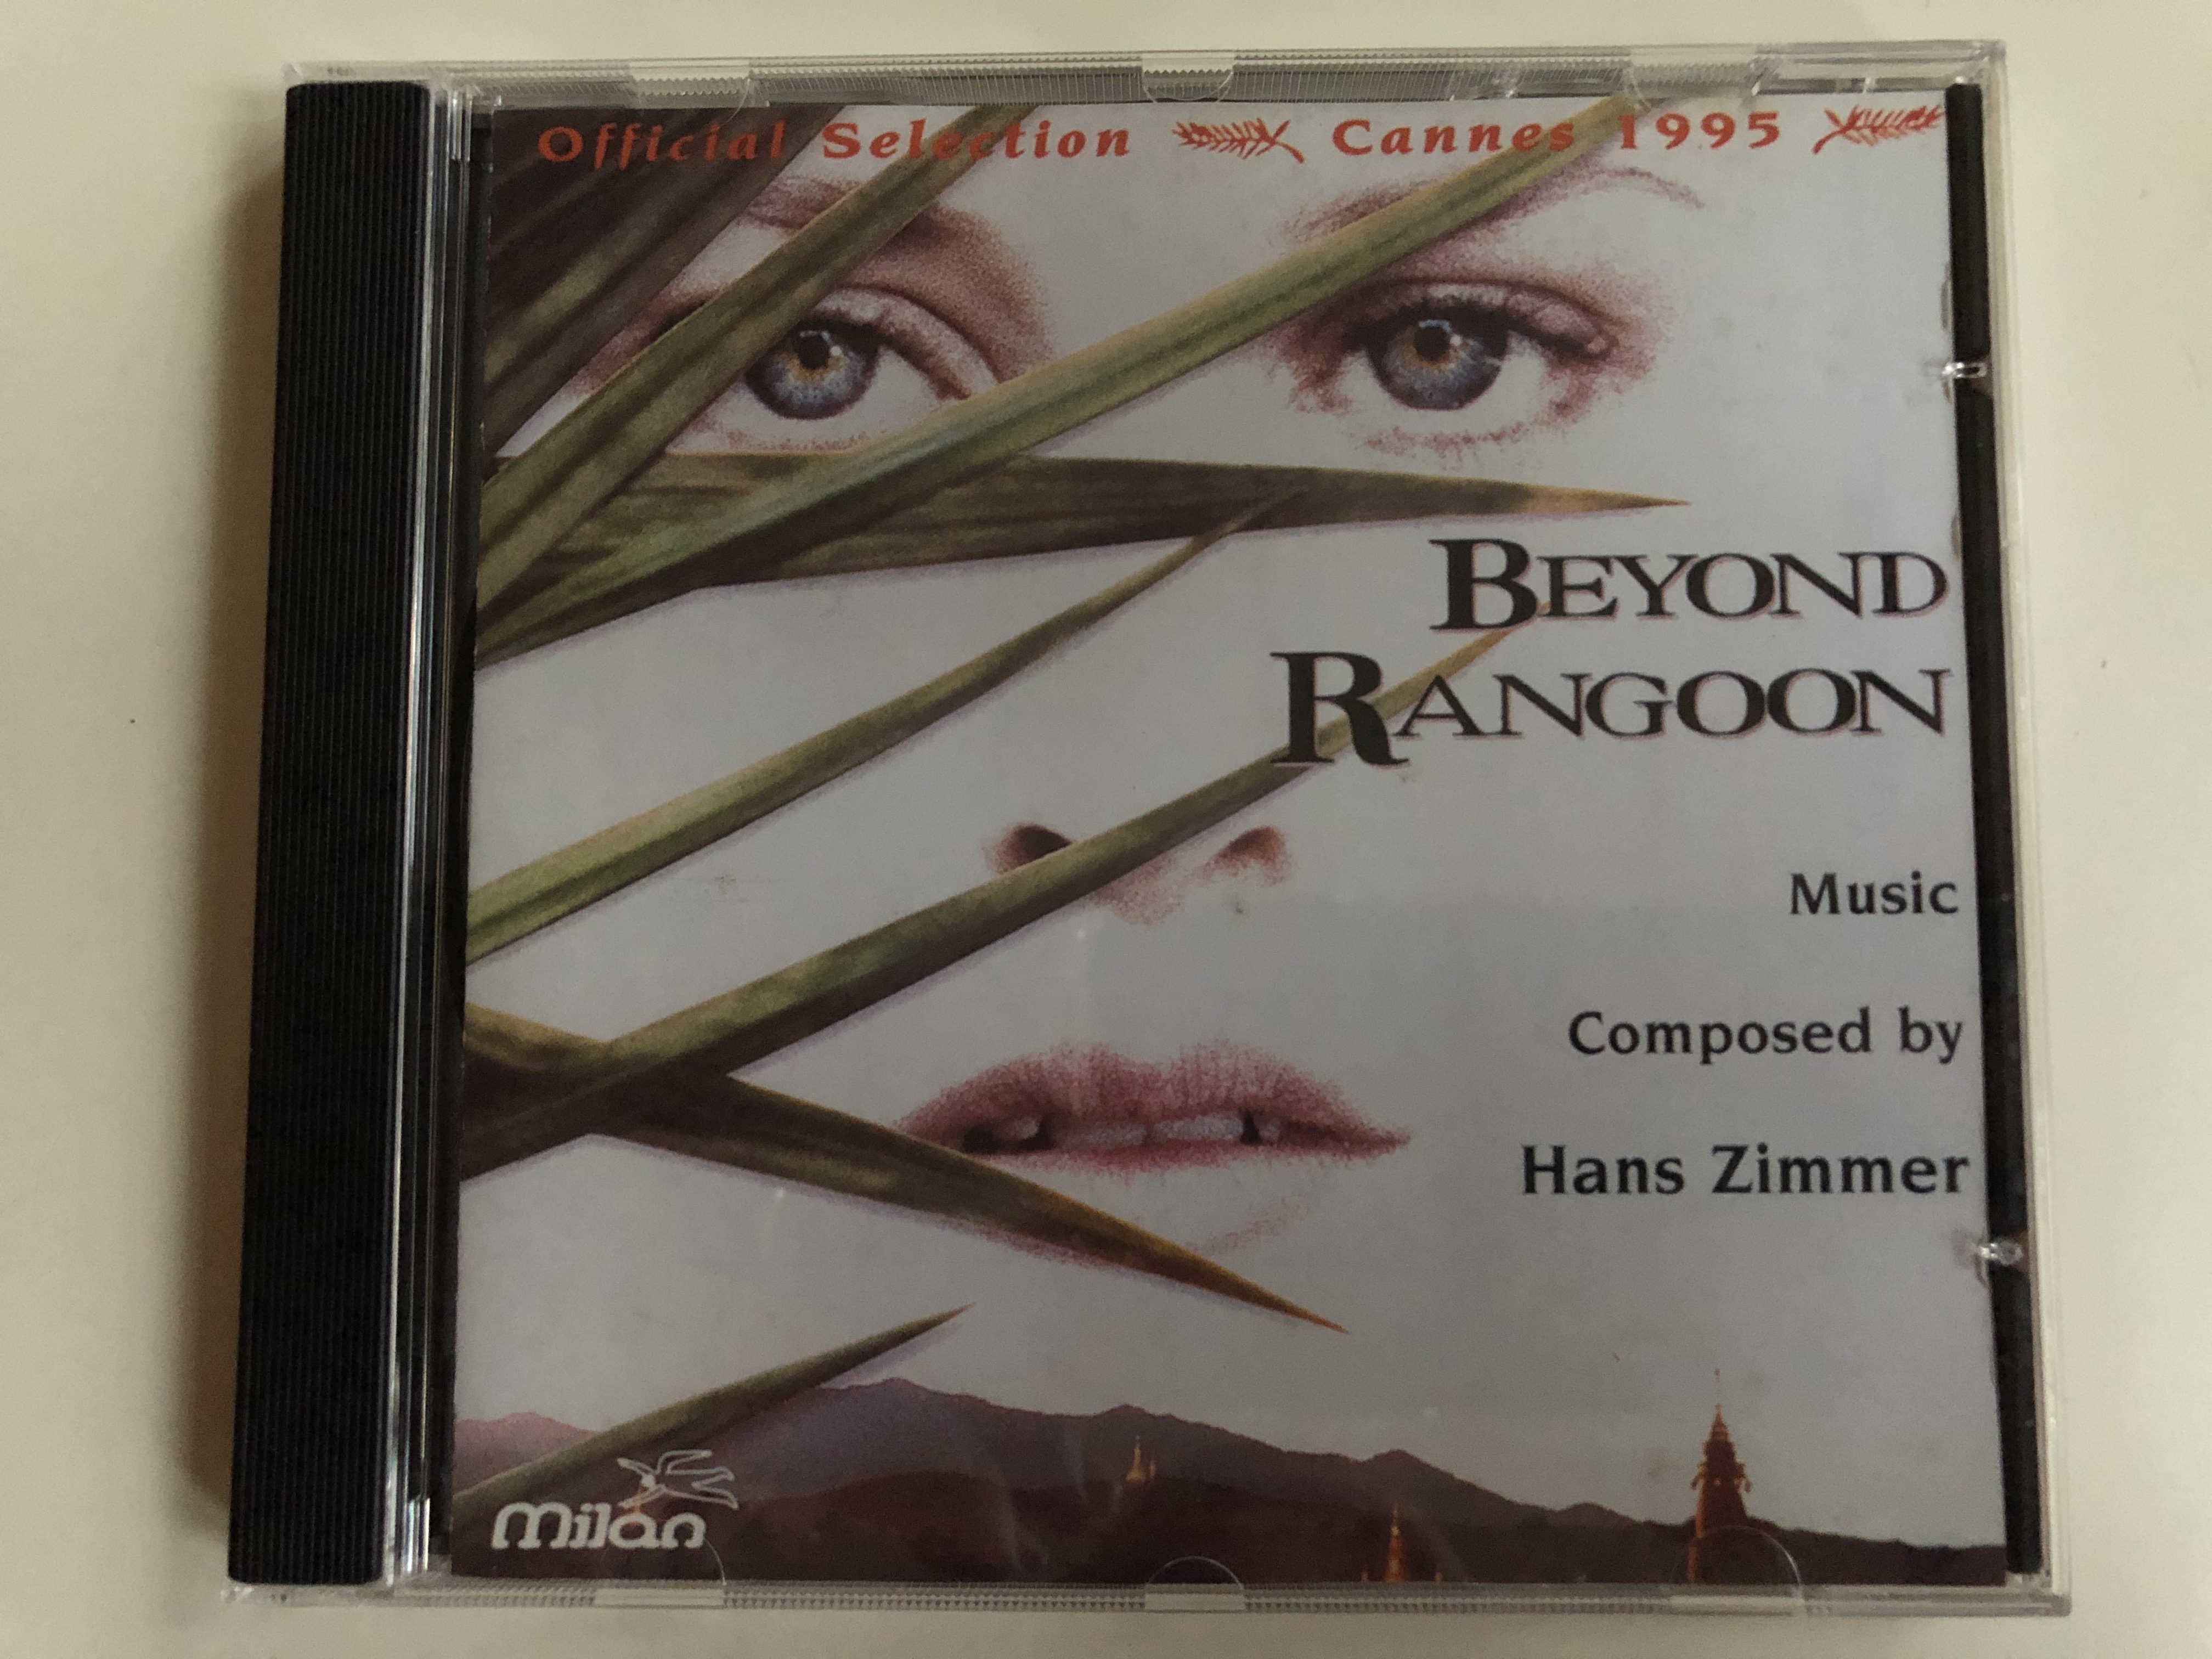 offical-selection-cannes-1995-beyond-rangoon-music-composed-by-hans-zimmer-milan-audio-cd-1995-5050466298522-1-.jpg